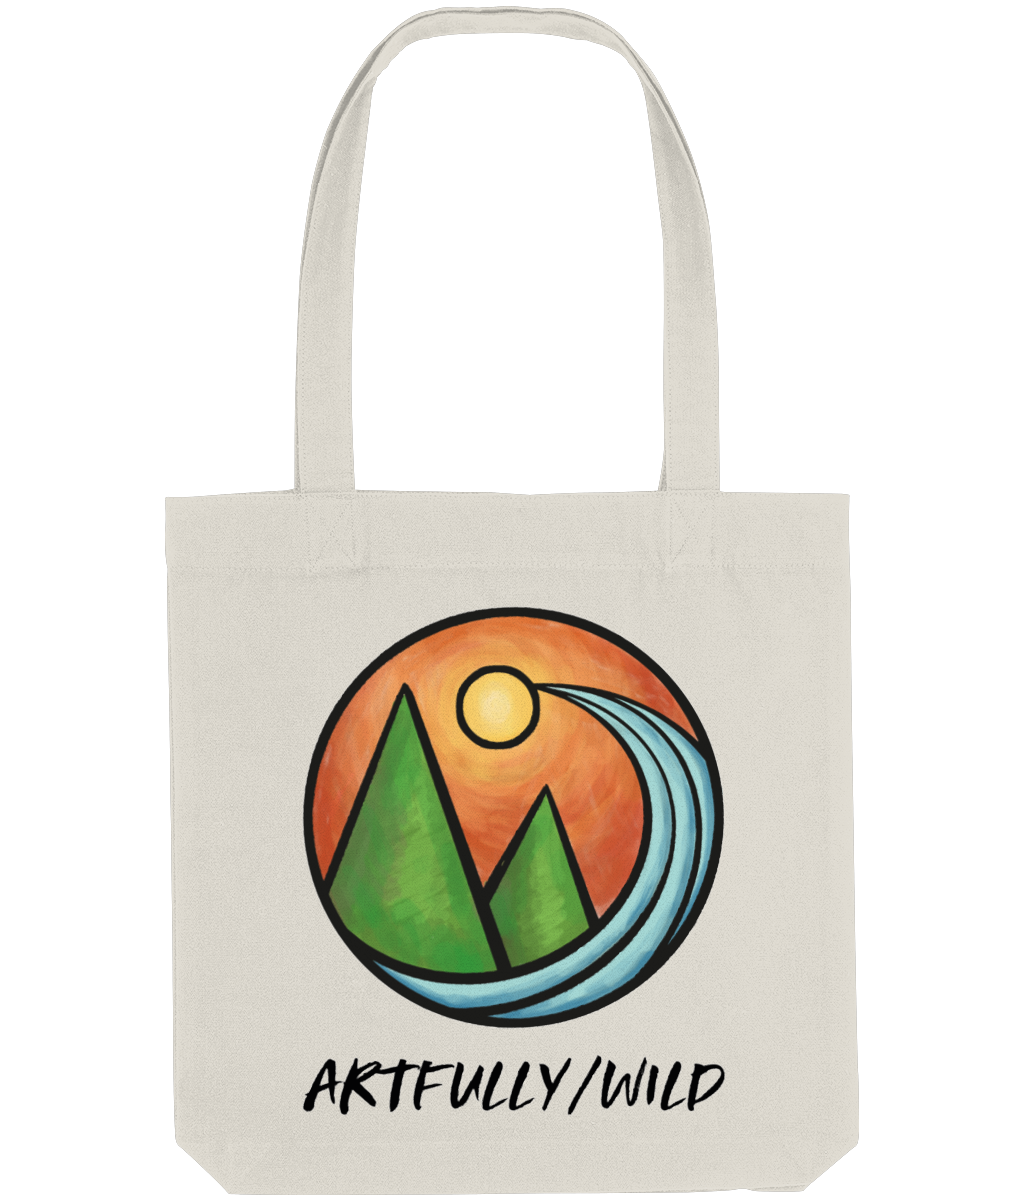 ARTFULLY WILD Natural Recycled Canvas Total Bag. Painted Coloured Landscape Icon. Original Illustration by Artfully/Wild UK.